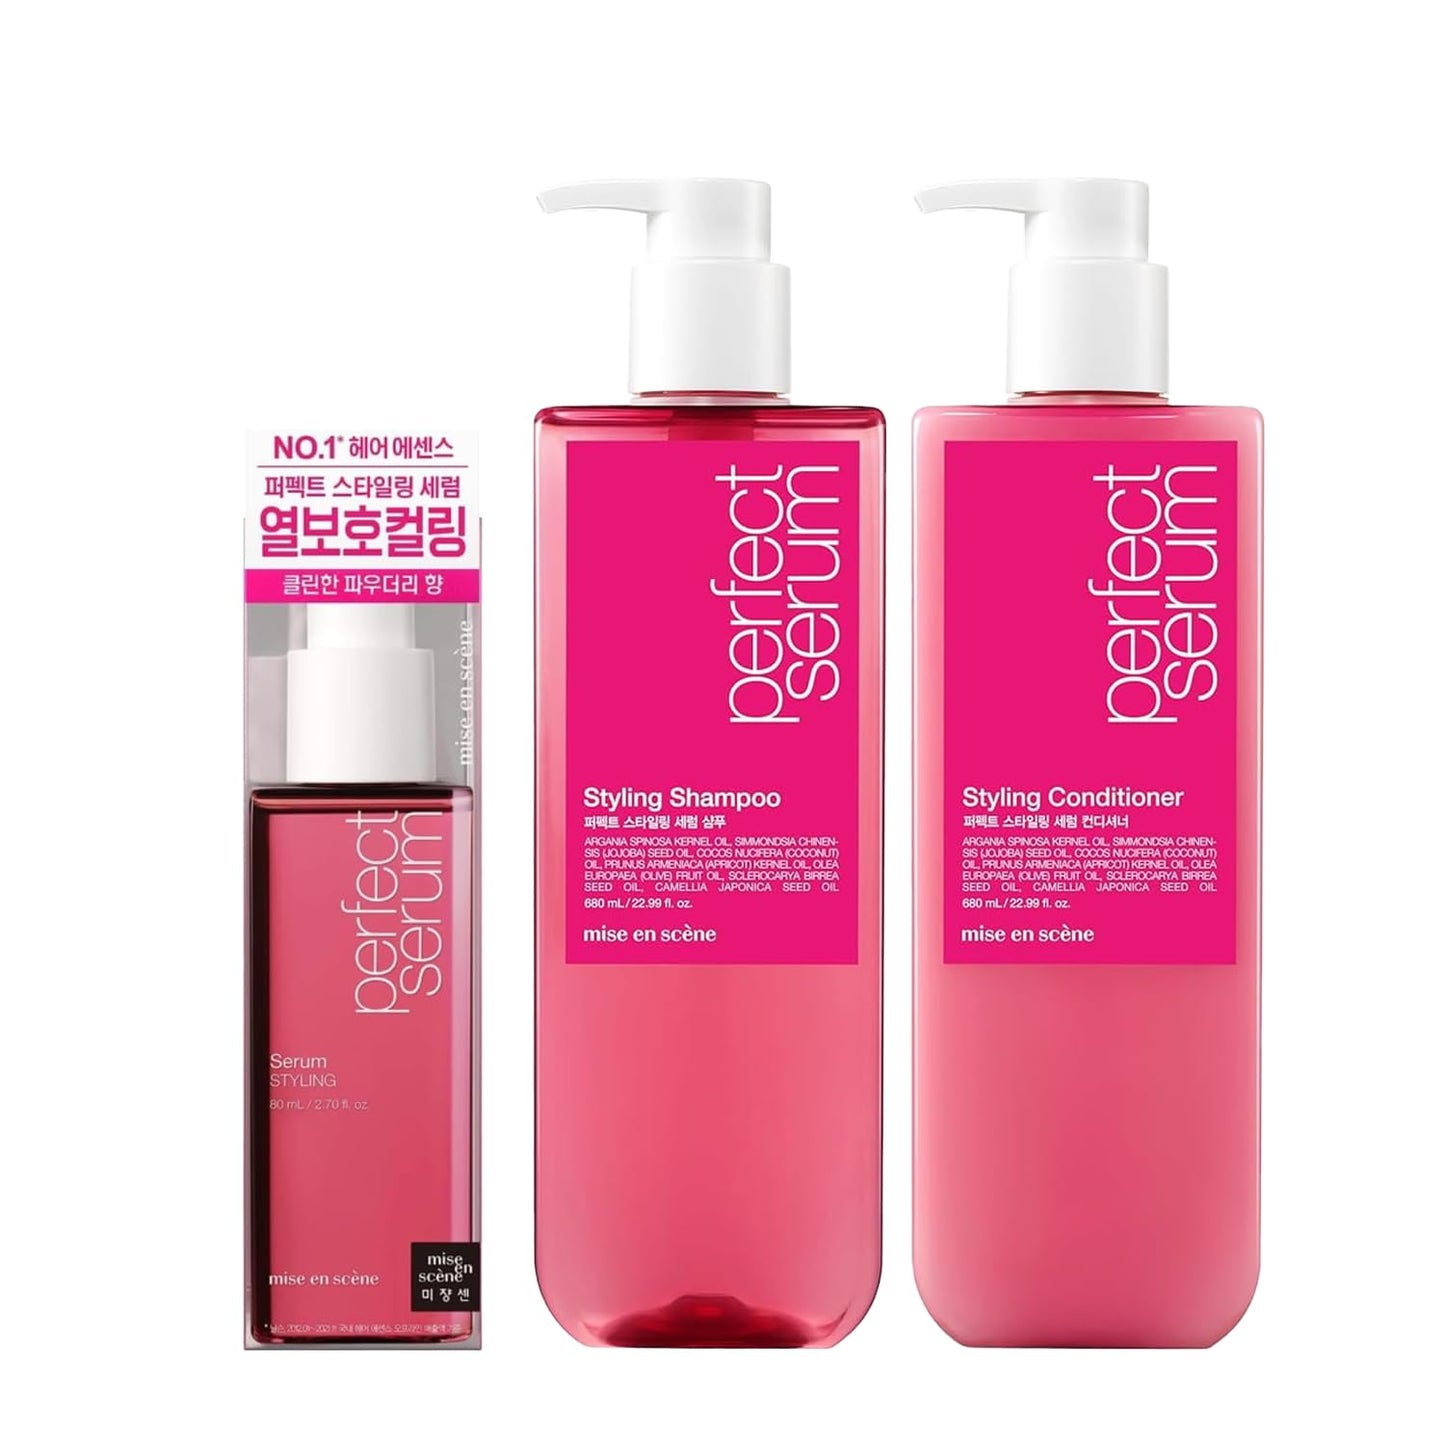 MISE EN SCENE Styling Serum with Shampoo and Conditioner: Hair Care Set Holds Bounce, Hair Essence for Long Lasting Curl, Powdery Scent with Argan Oils, Coconut Apricot Scent, Serum - 2.70 fl oz, Pair - 22.99 fl oz